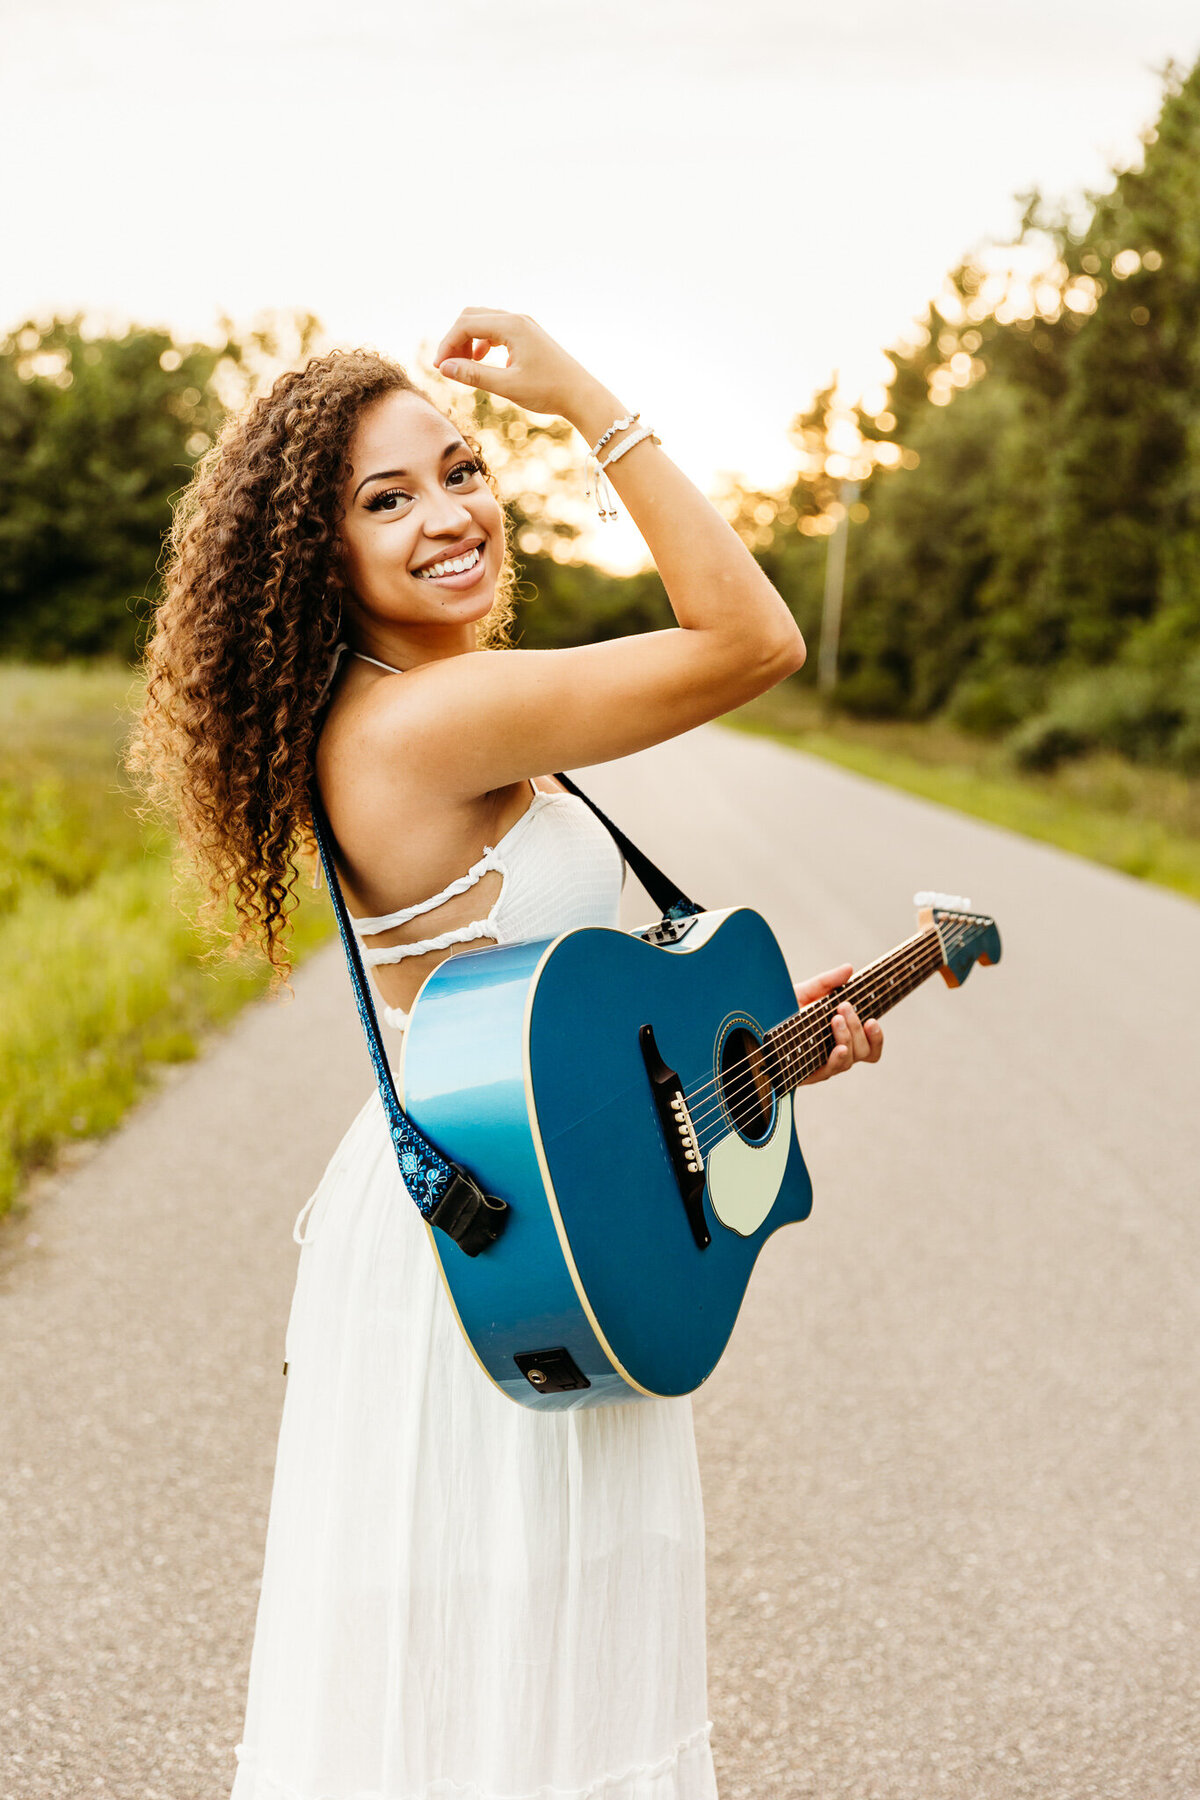 high school senior with curly hair and a white dress smiling while holding a guitar in a road